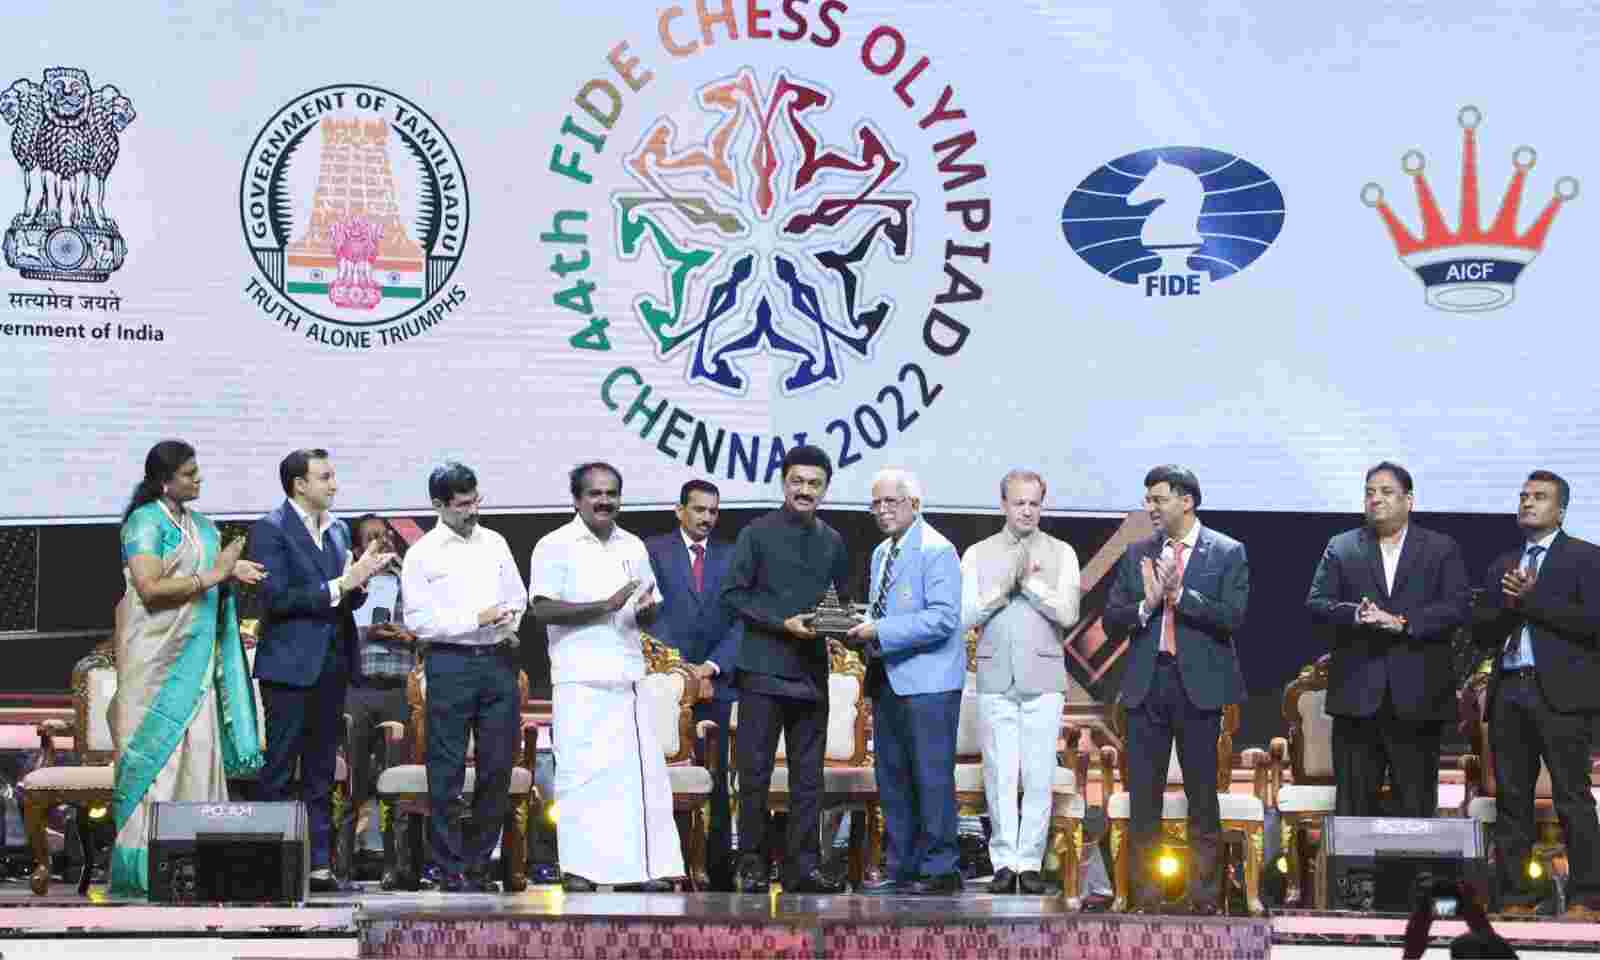 44th CHESS OLYMPIAD 2022, TNPSC CURRENT AFFAIRS, IMPORTANT SPORTS UPDATE